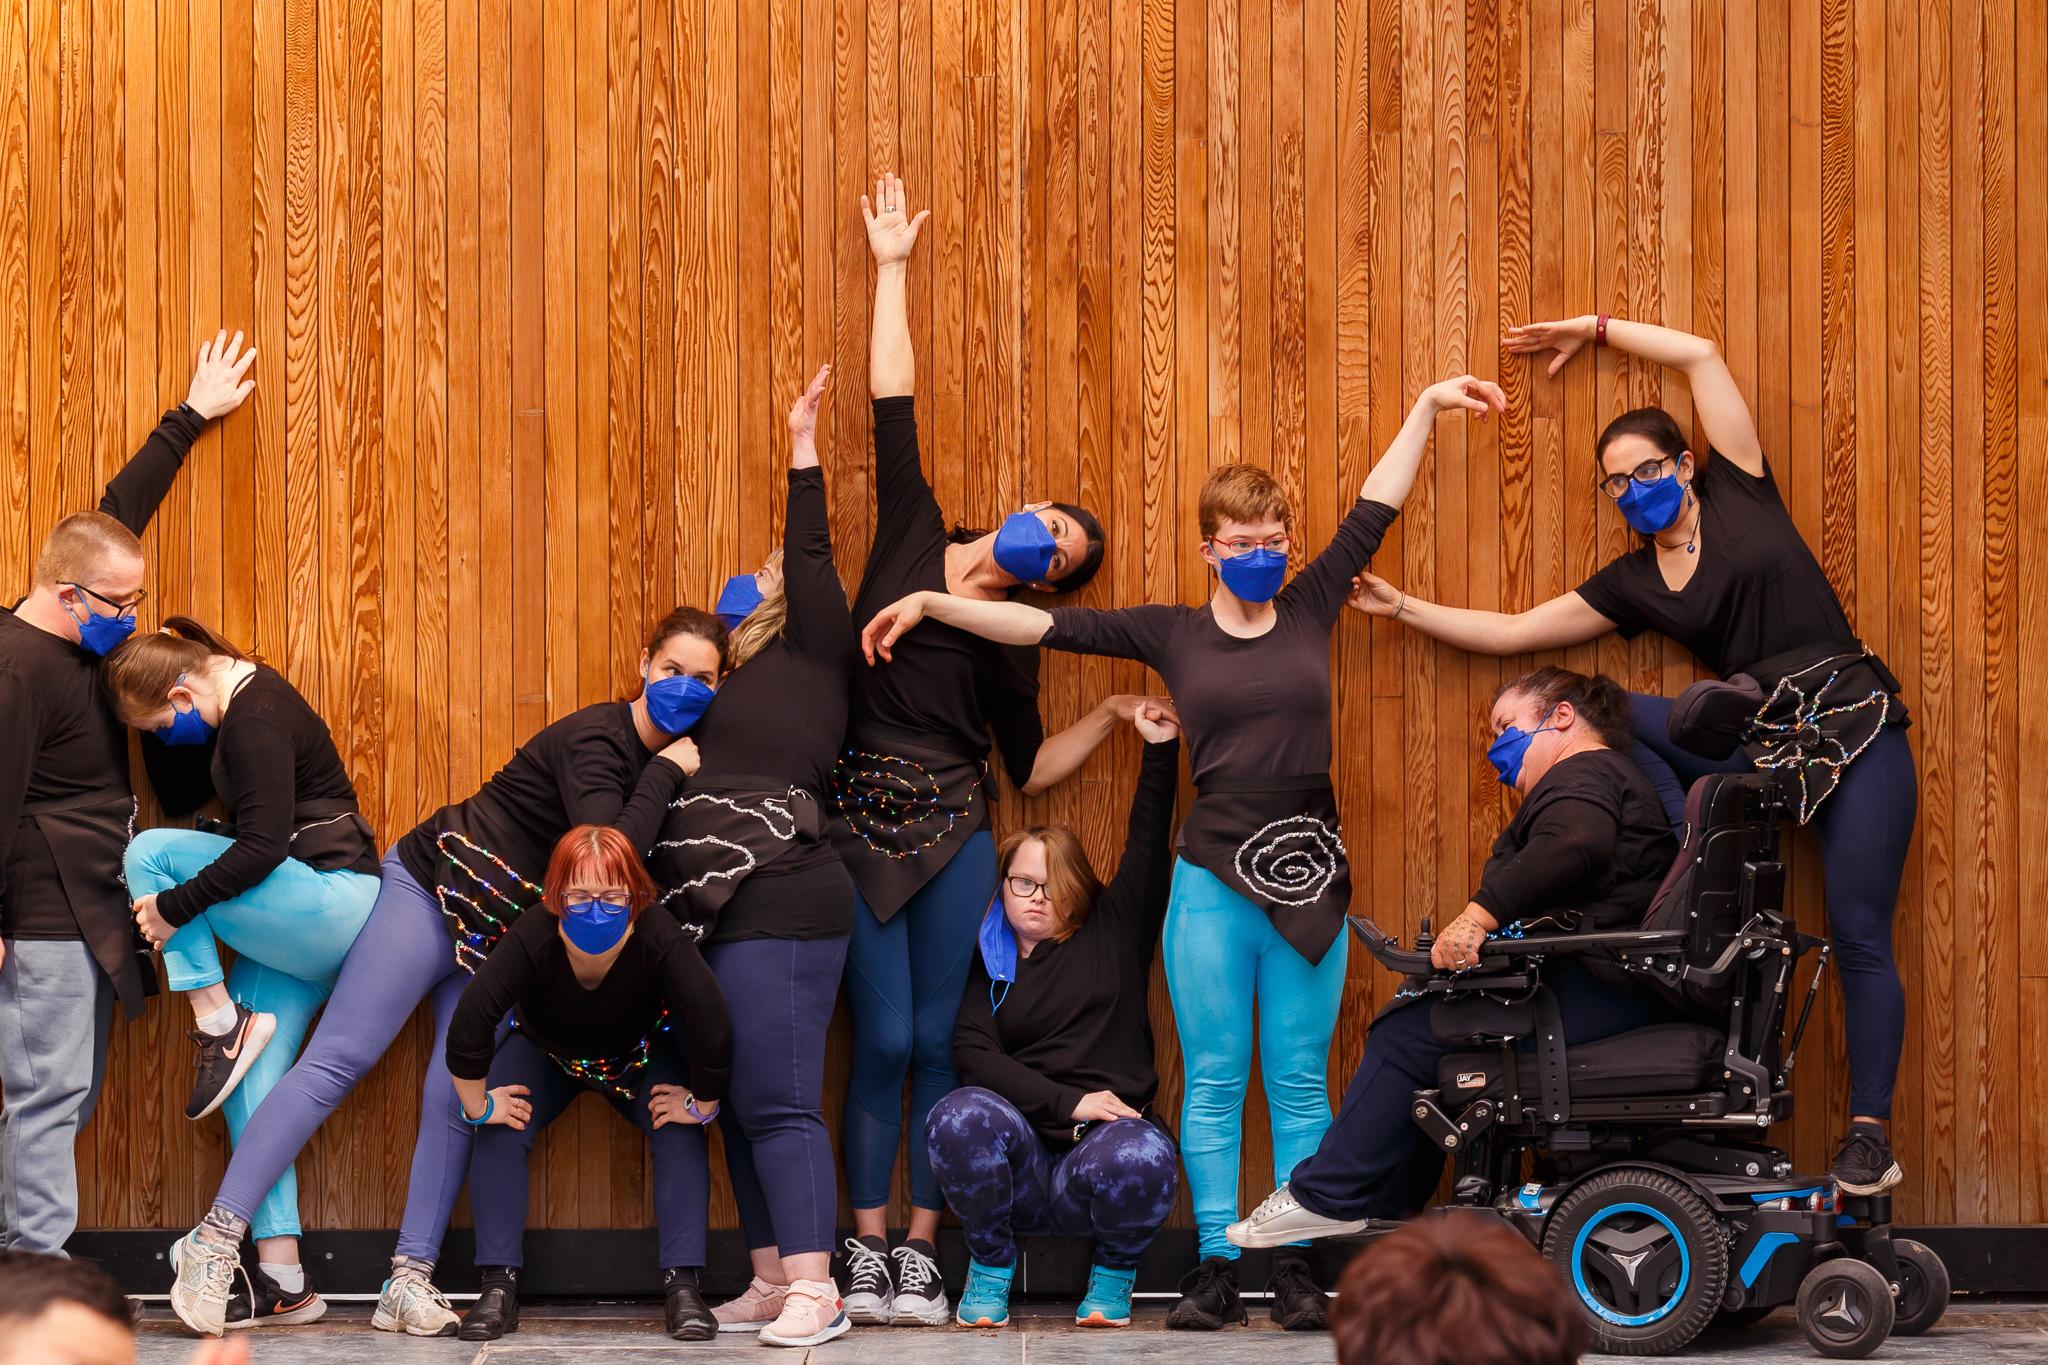 10 dancers, wearing black tops and royal blue face masks, stand close together, making shapes against vertical brown planks of wood.